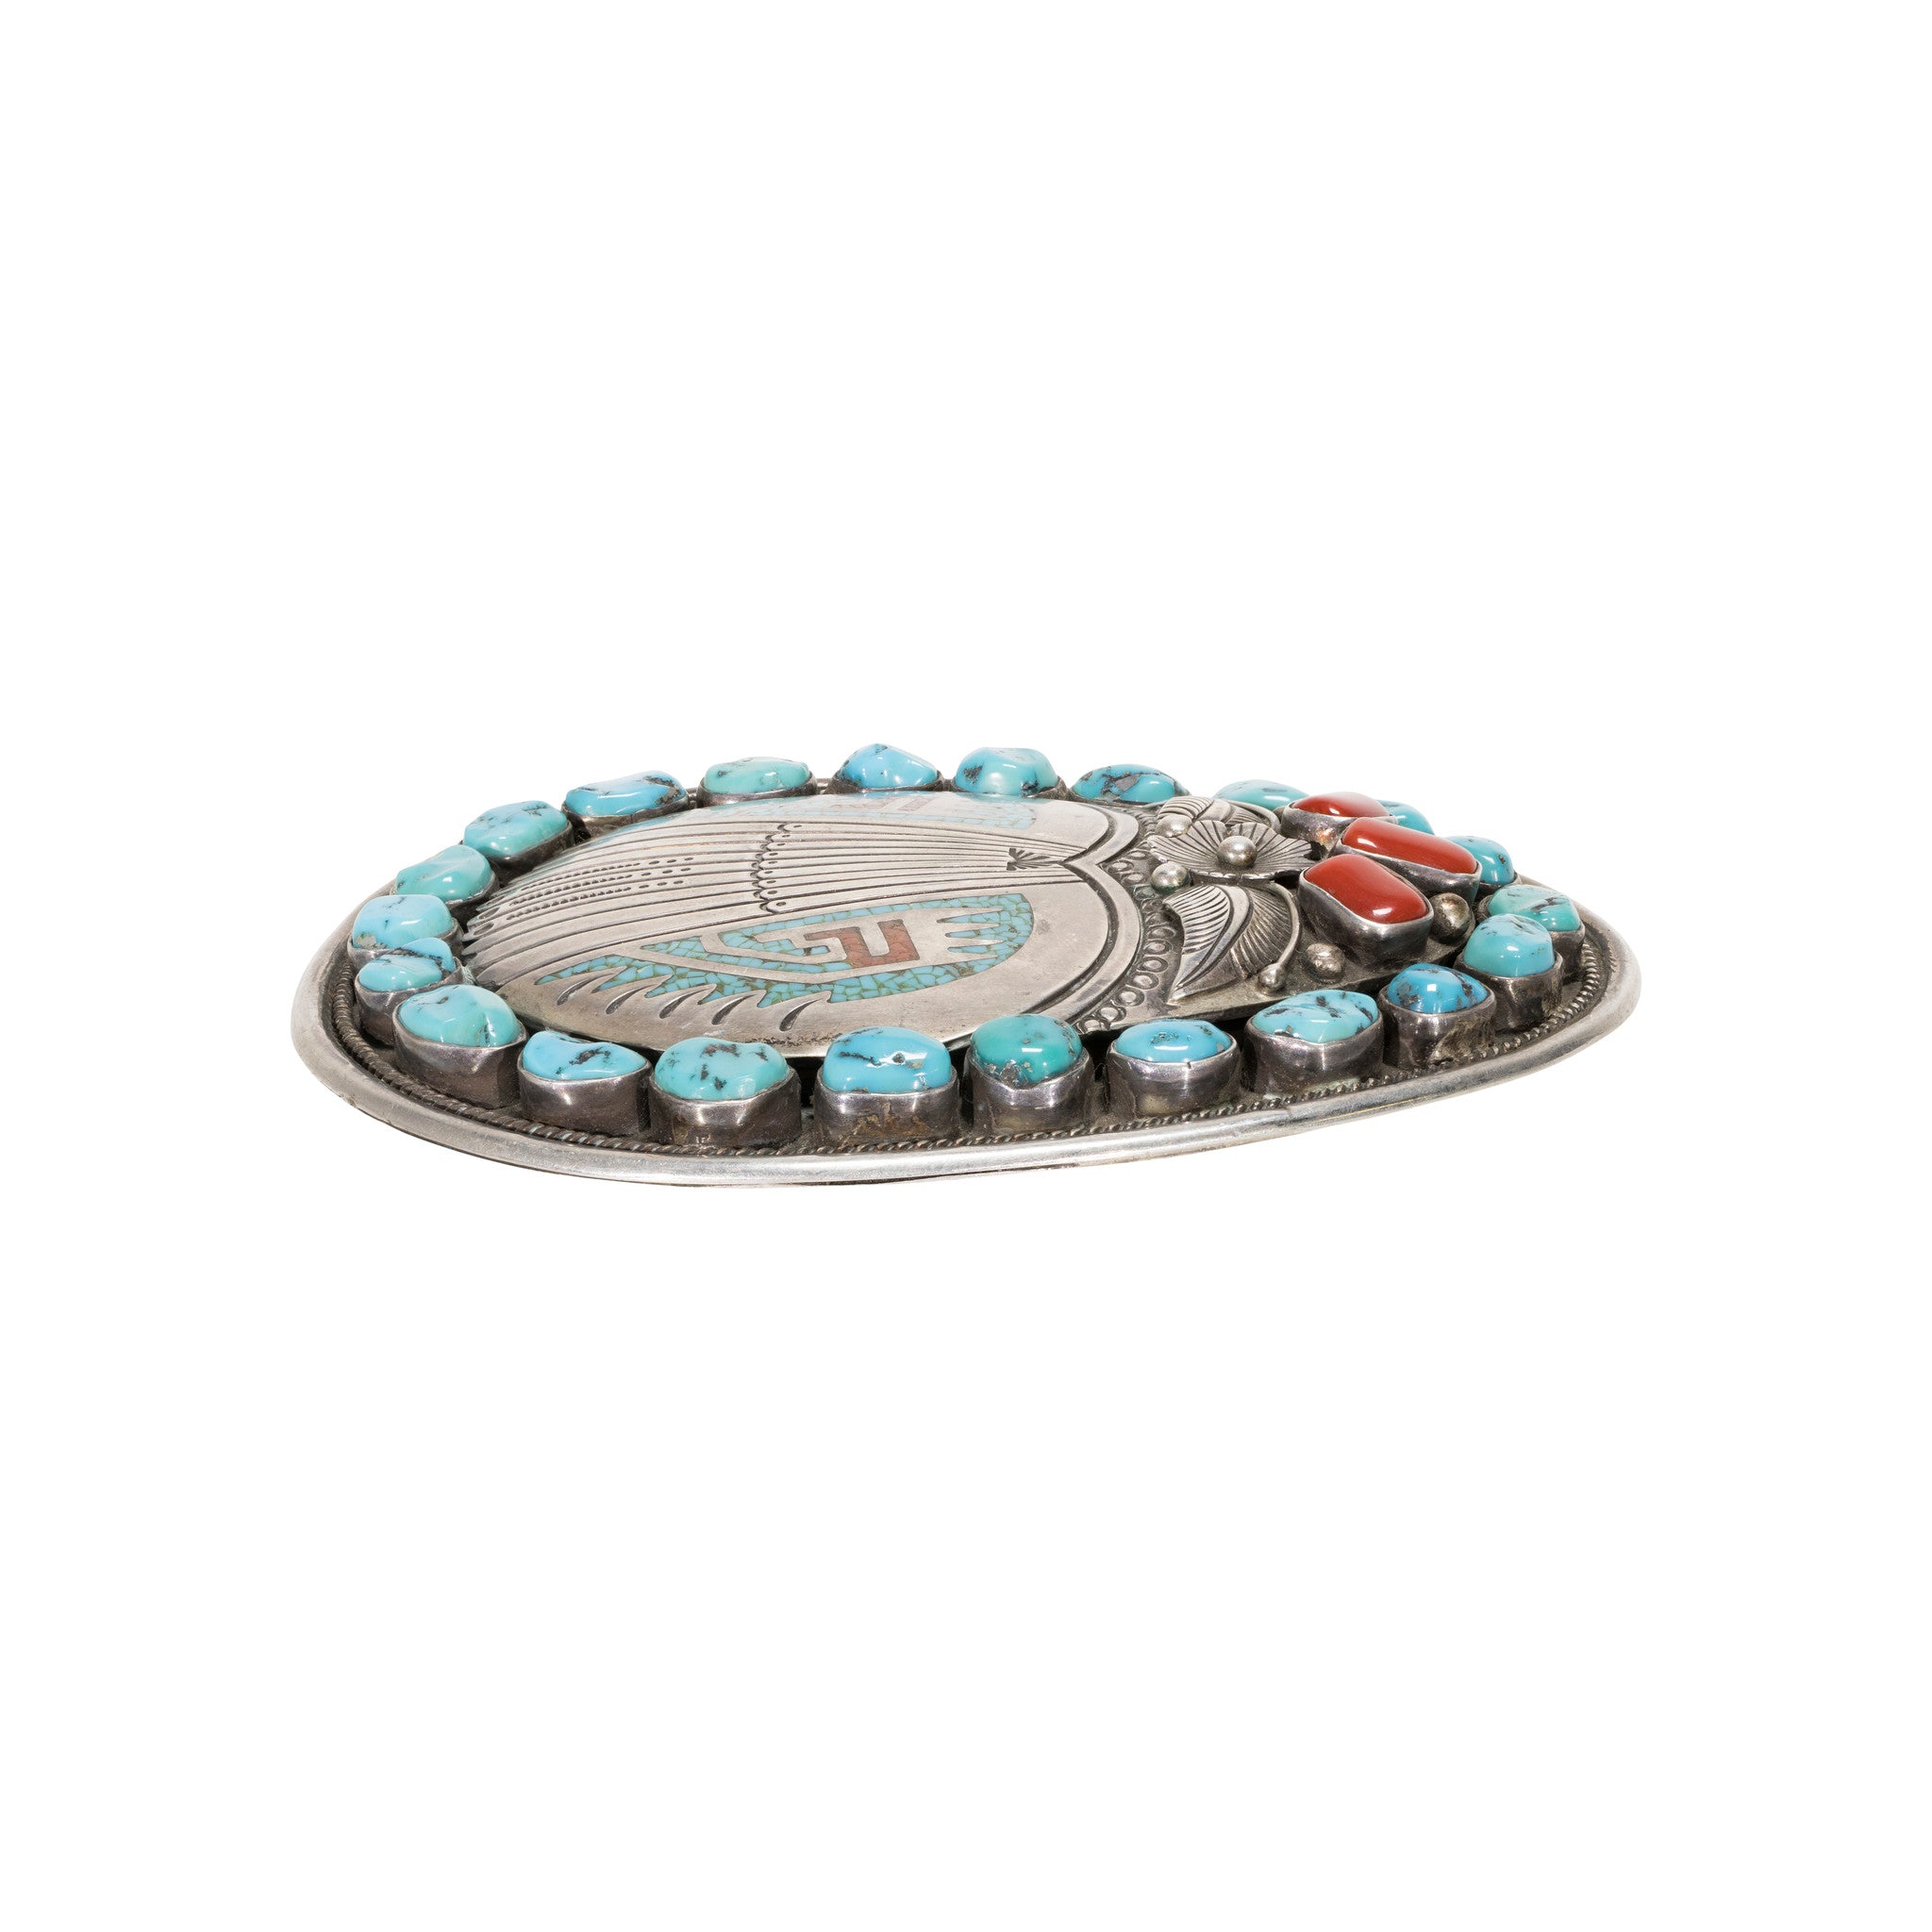 Zuni Turquoise and Coral Buckle